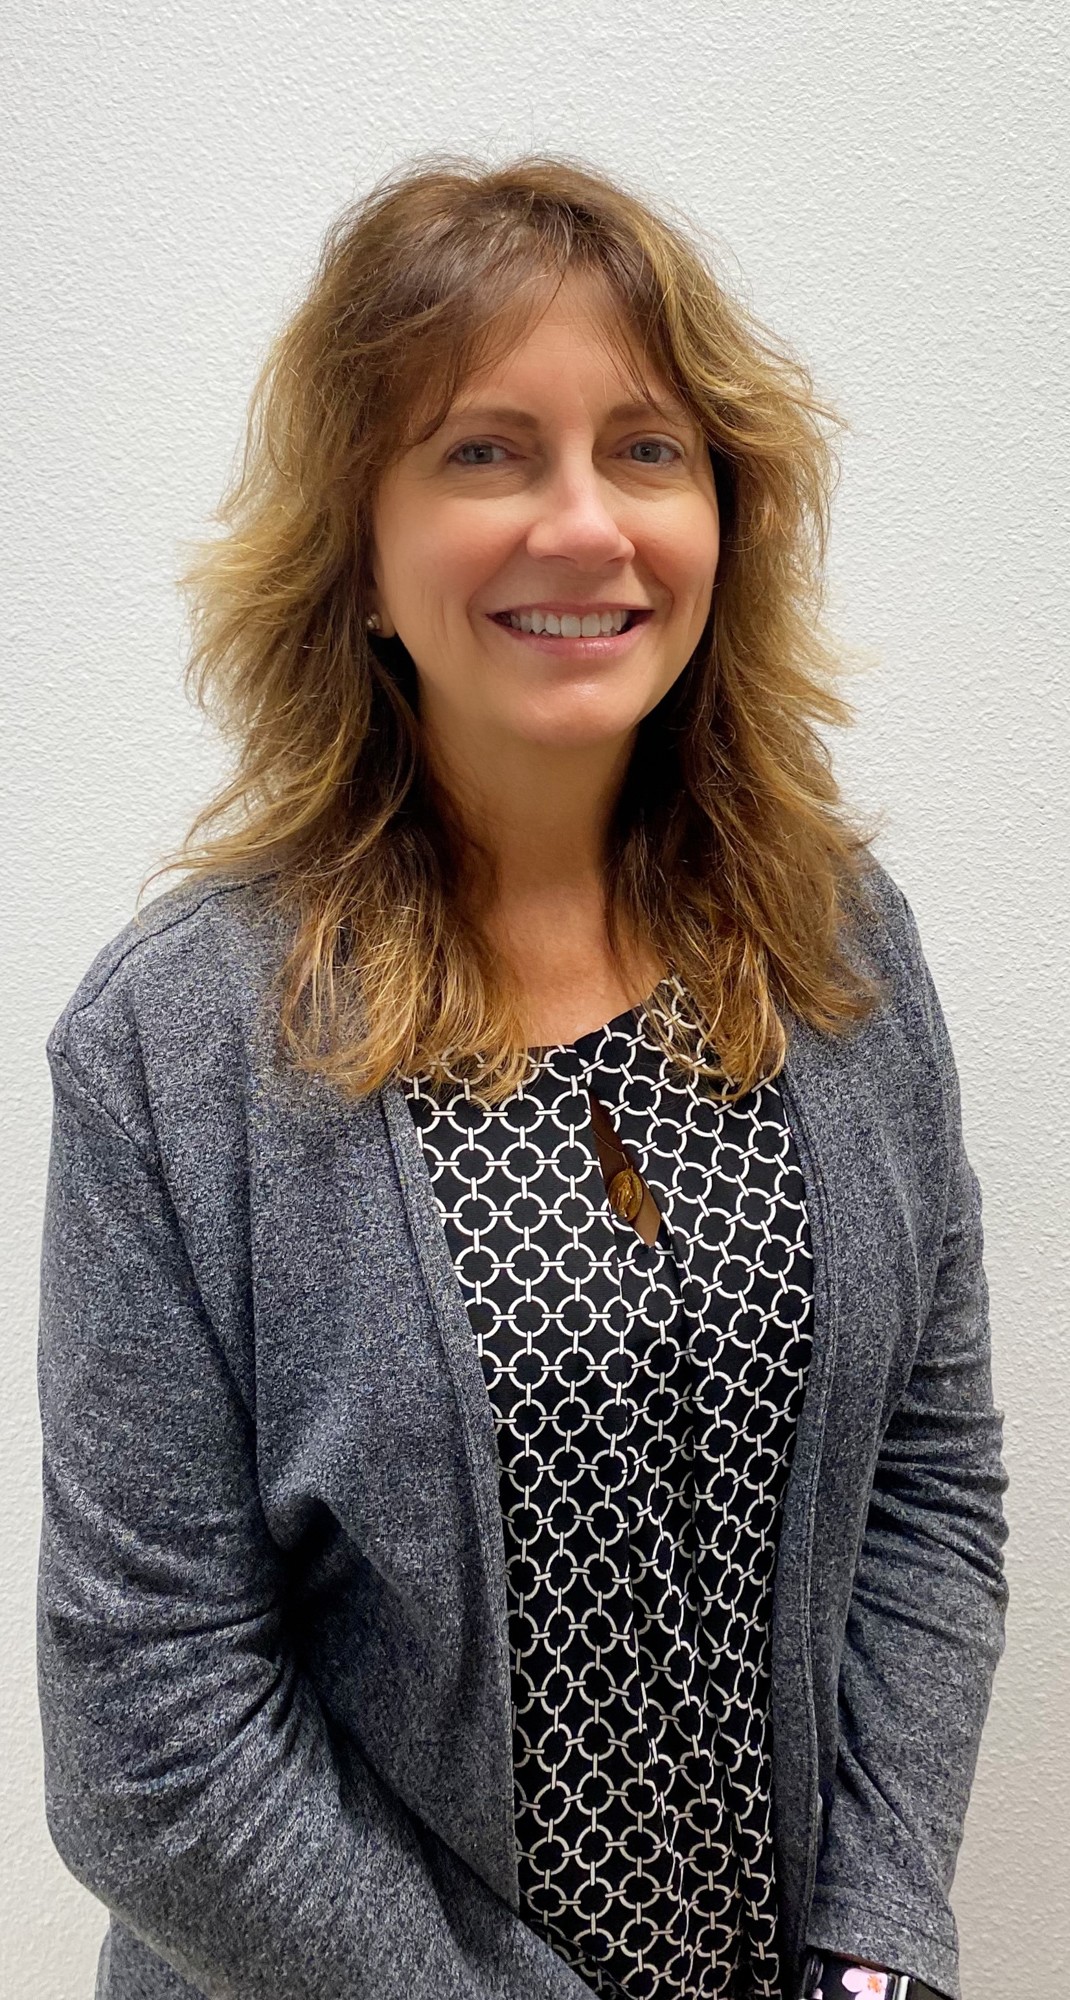 Courtesy. Lisa Gonzalez-Abello, M.D., is the new chief medical officer at CenterPlace Health.